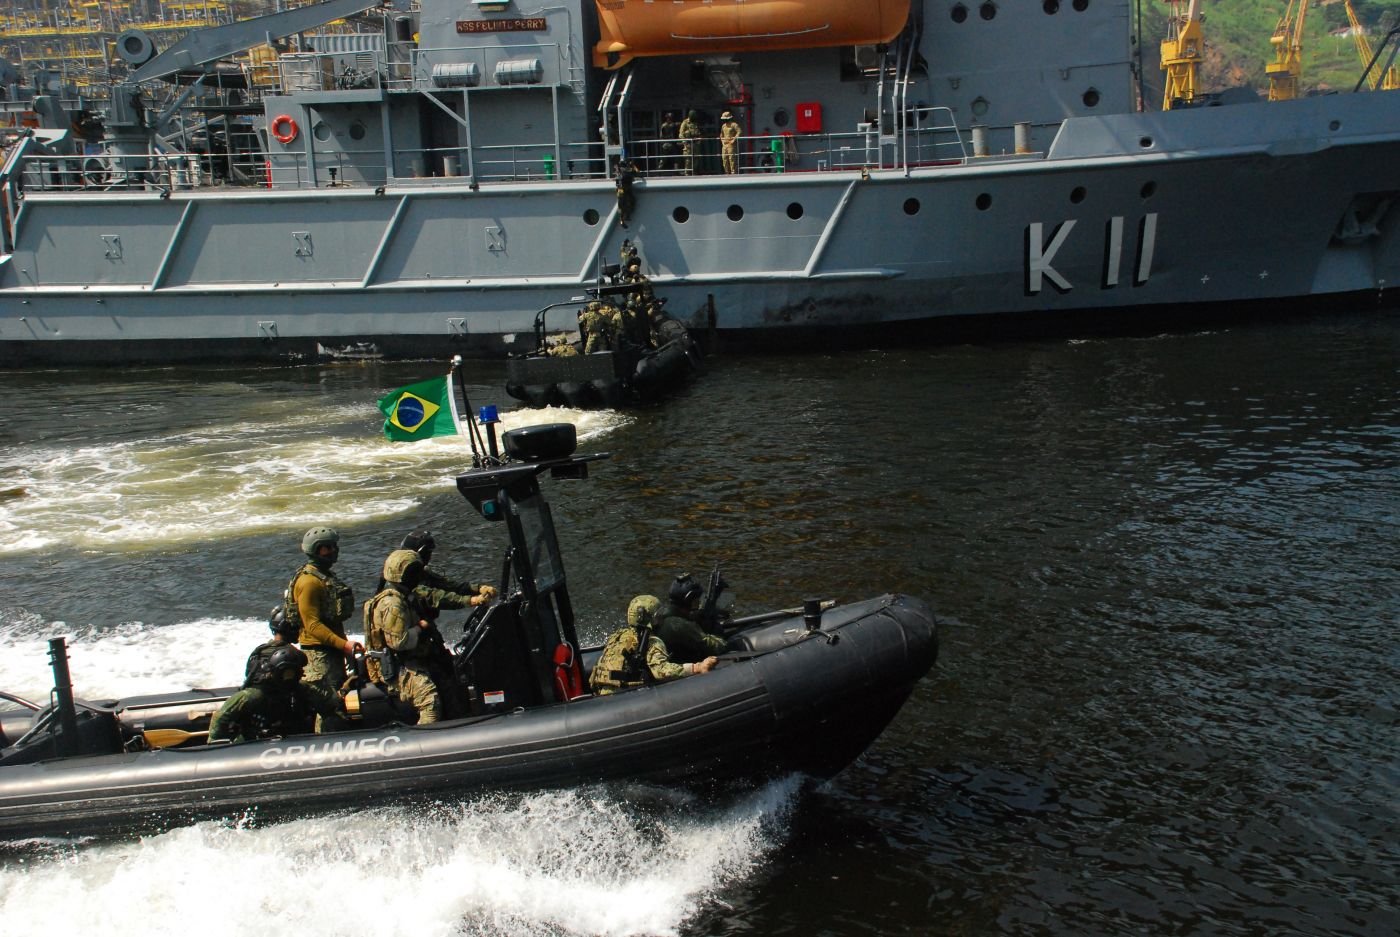 Brazilian and U.S. Navies Work Together in Pre-Olympics Counter-terrorism Training